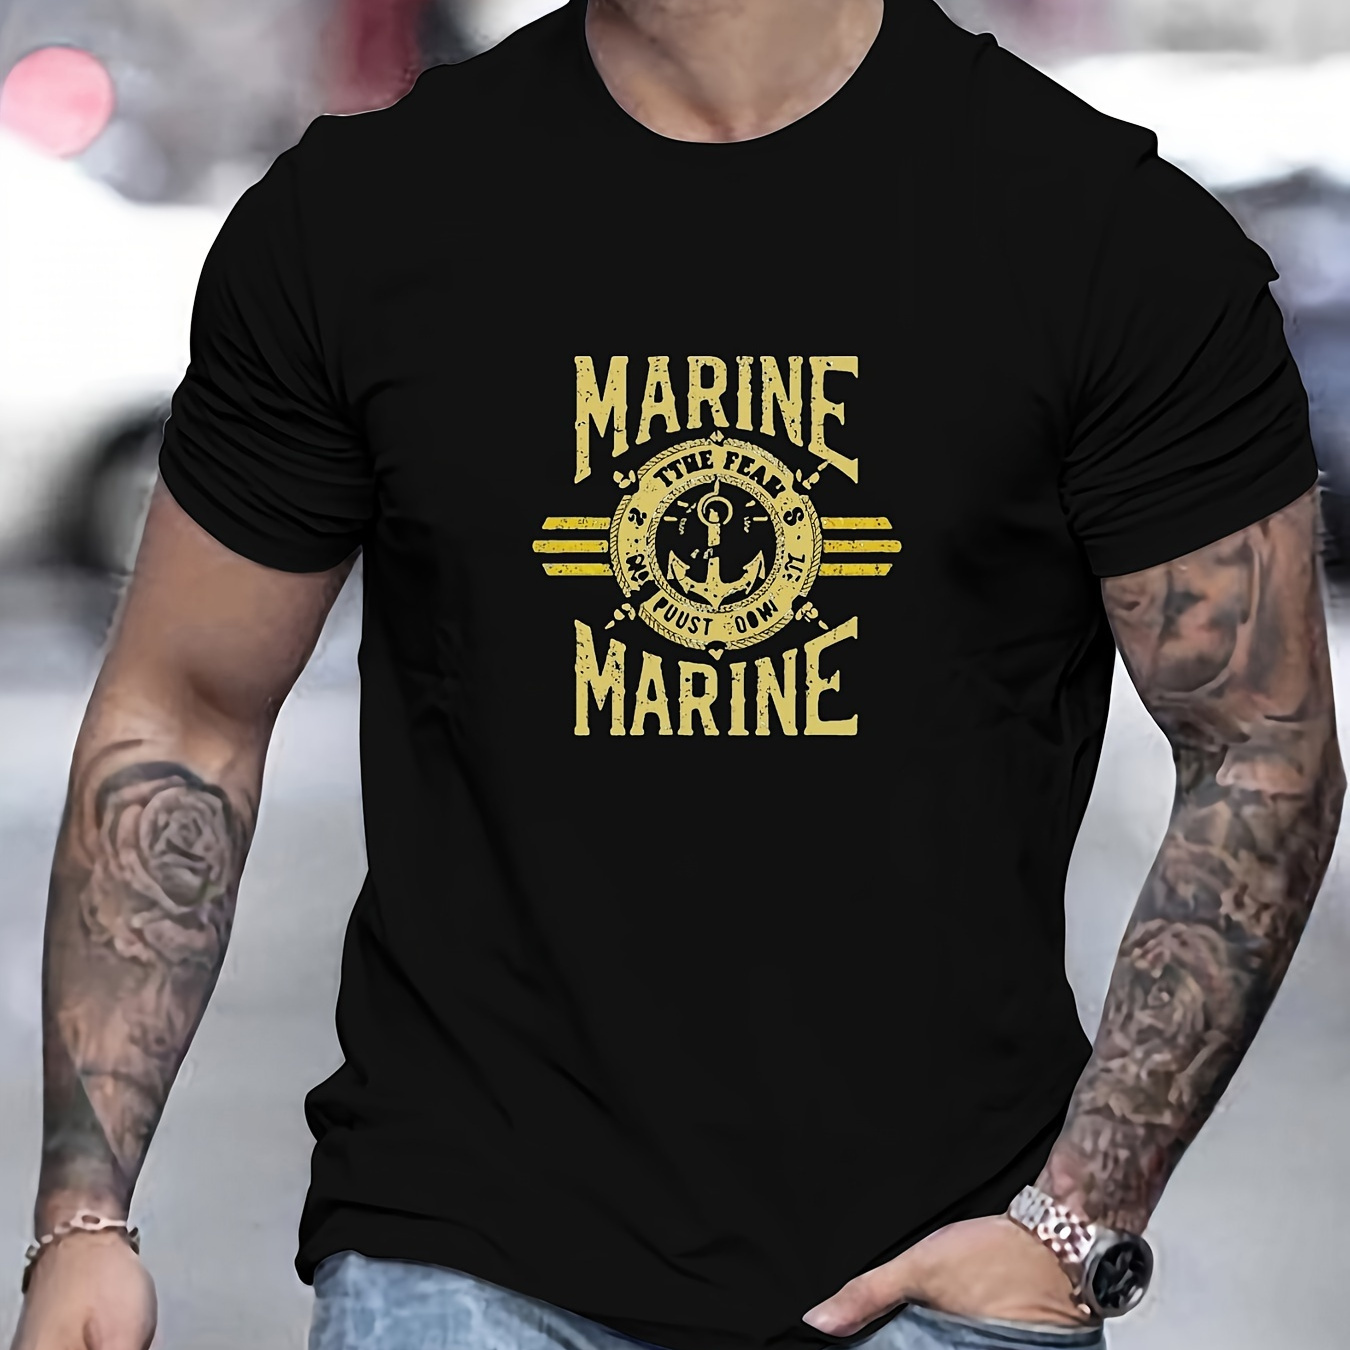 

easy Care" Men's Summer Casual Crew Neck T-shirt With Marine Graphic - Soft Cotton, Stretch Fabric, Non-transparent - Perfect For Daily Wear & Vacations